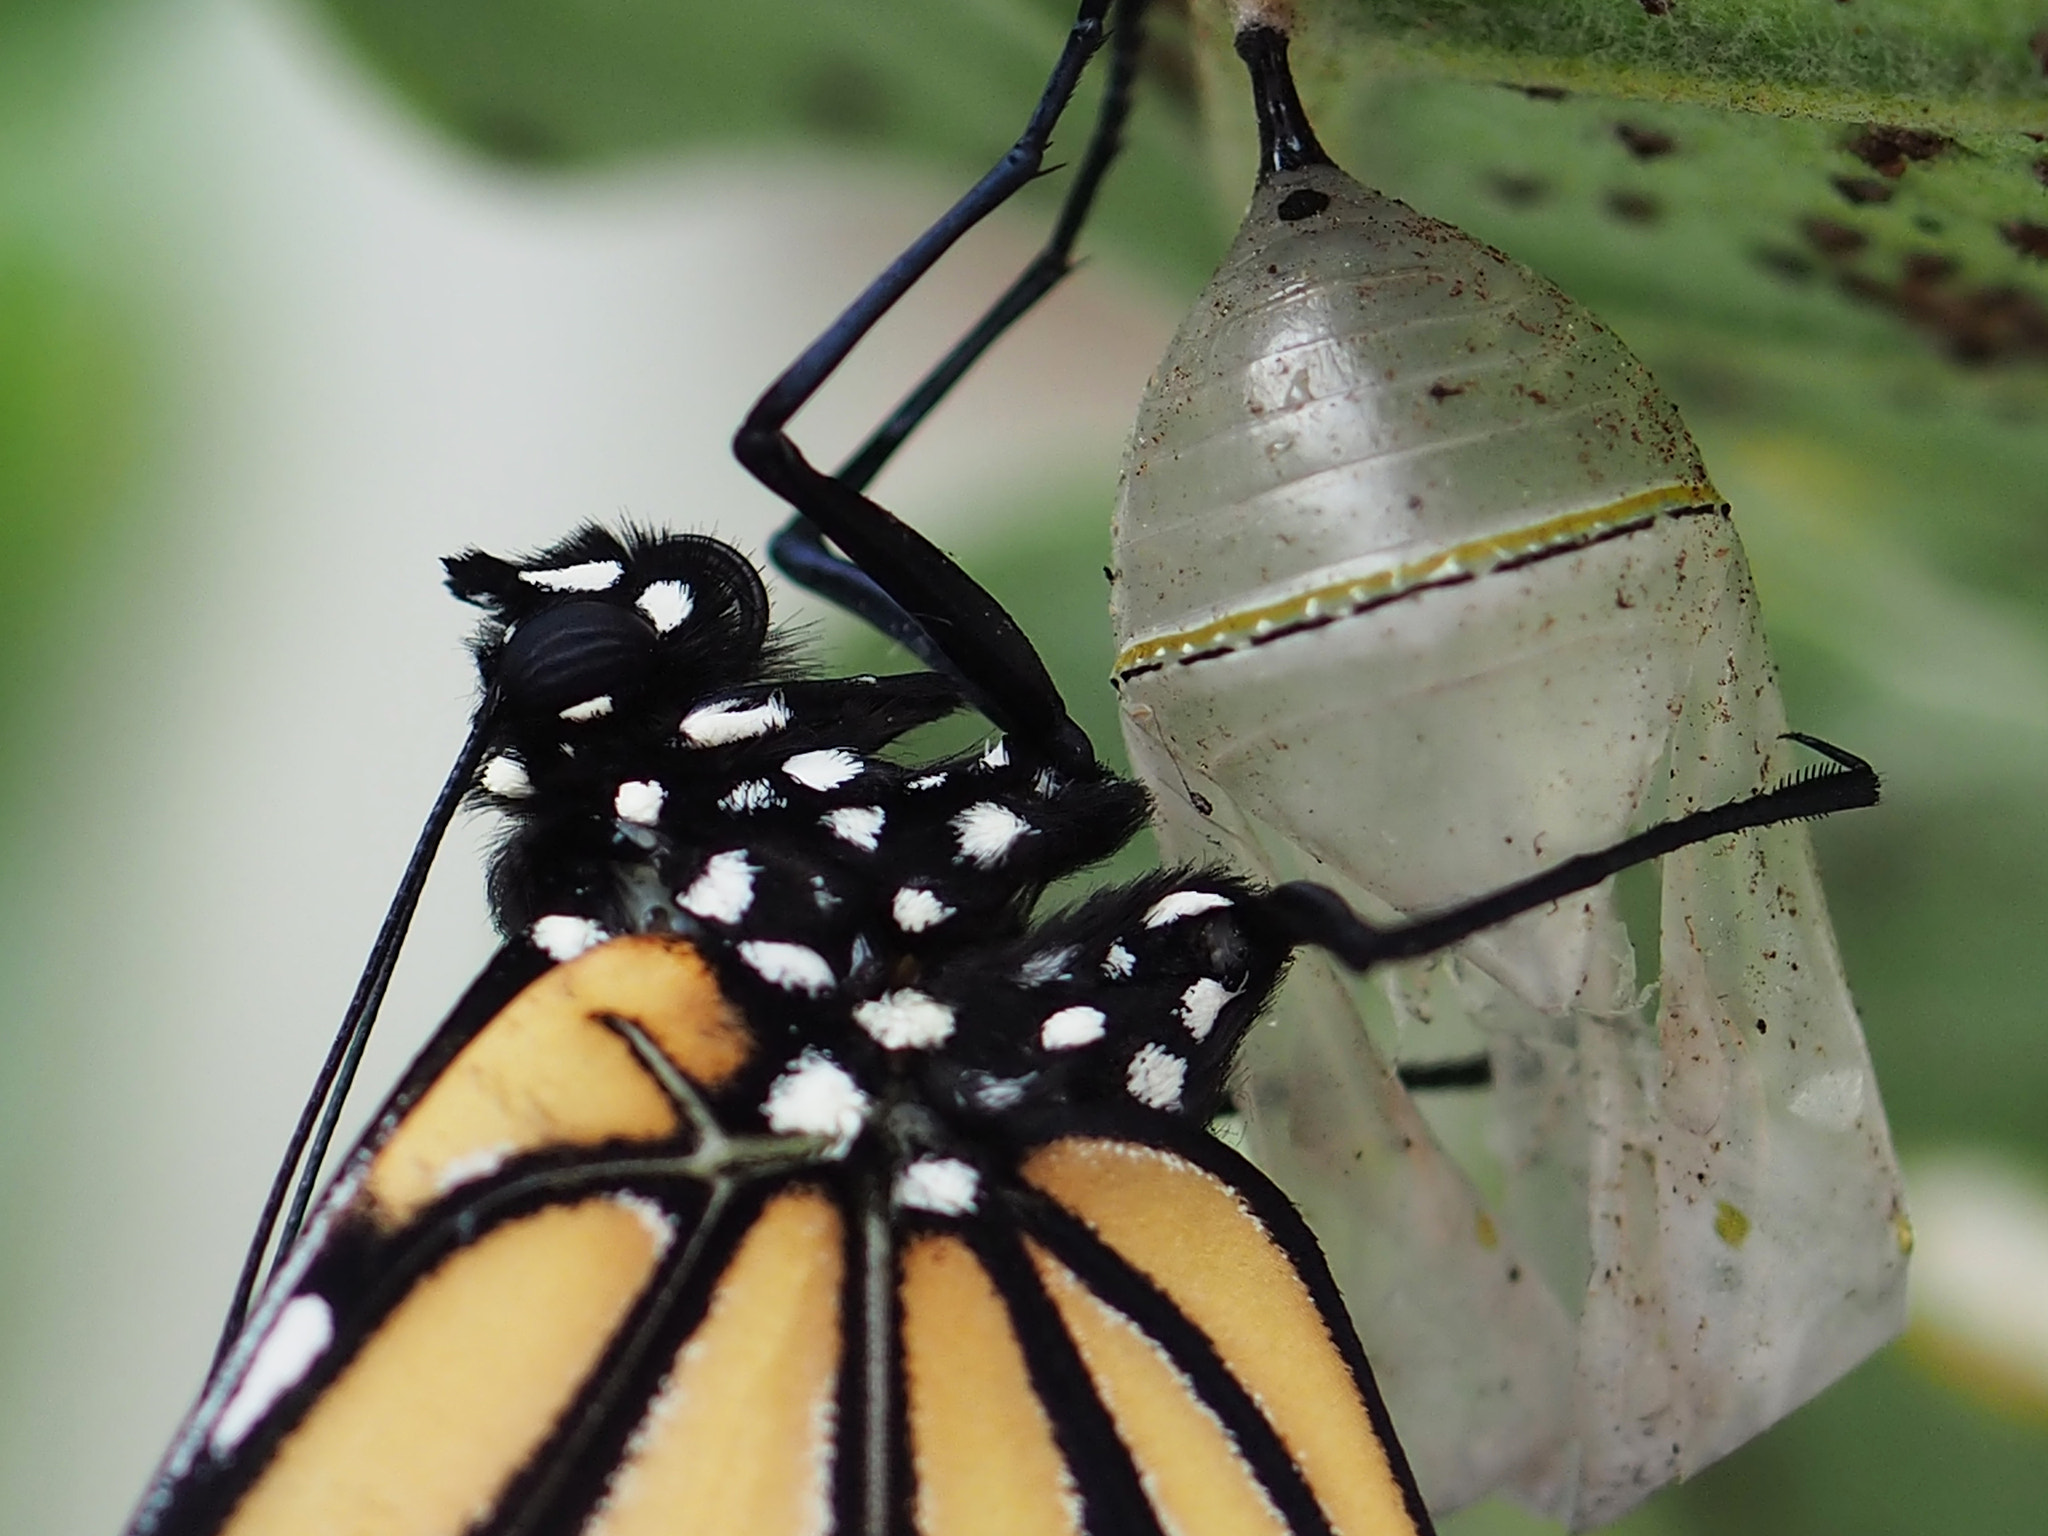 Olympus Air A01 sample photo. Hatching monarch butterfly photography